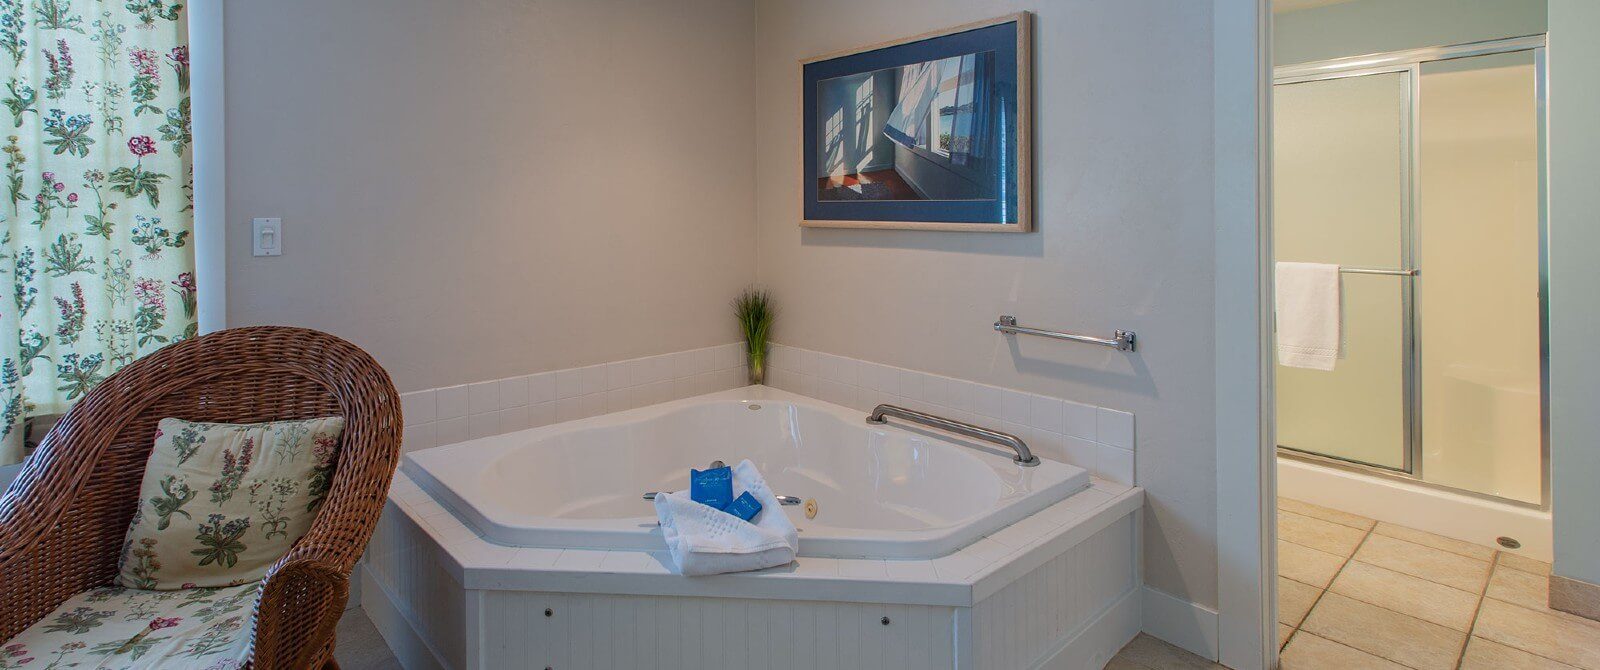 Corner jacuzzi tub, wicker sitting chair and doorway into a bathroom with a stand up shower with glass doors